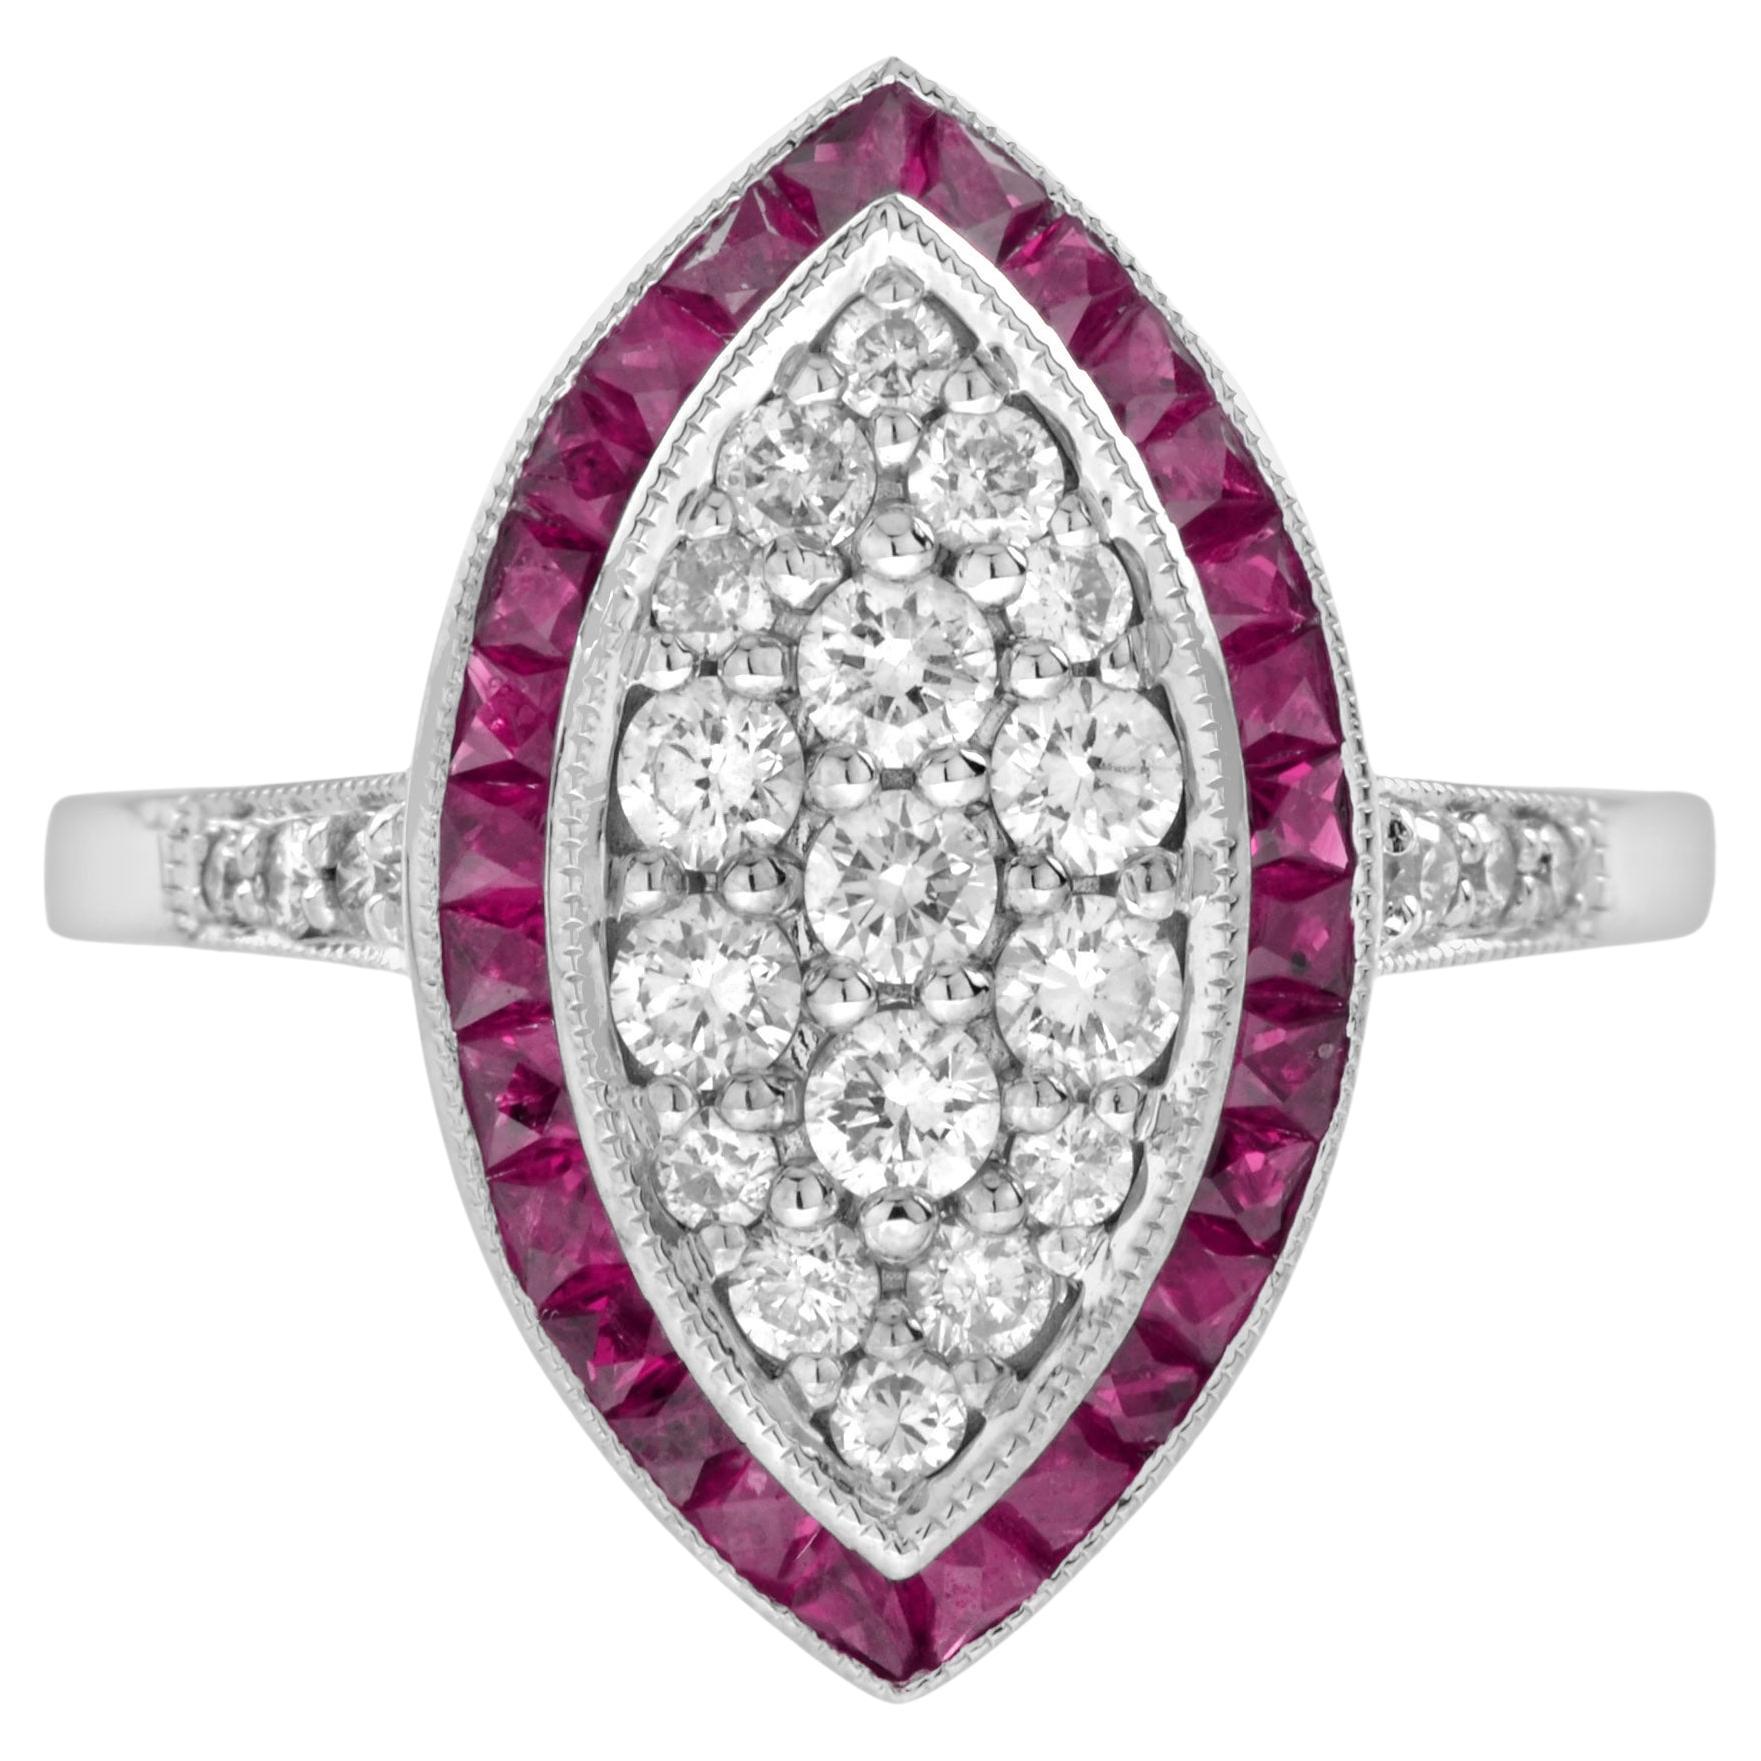 Diamond Cluster and Ruby Art Deco Style Dinner Ring in 18K White Gold